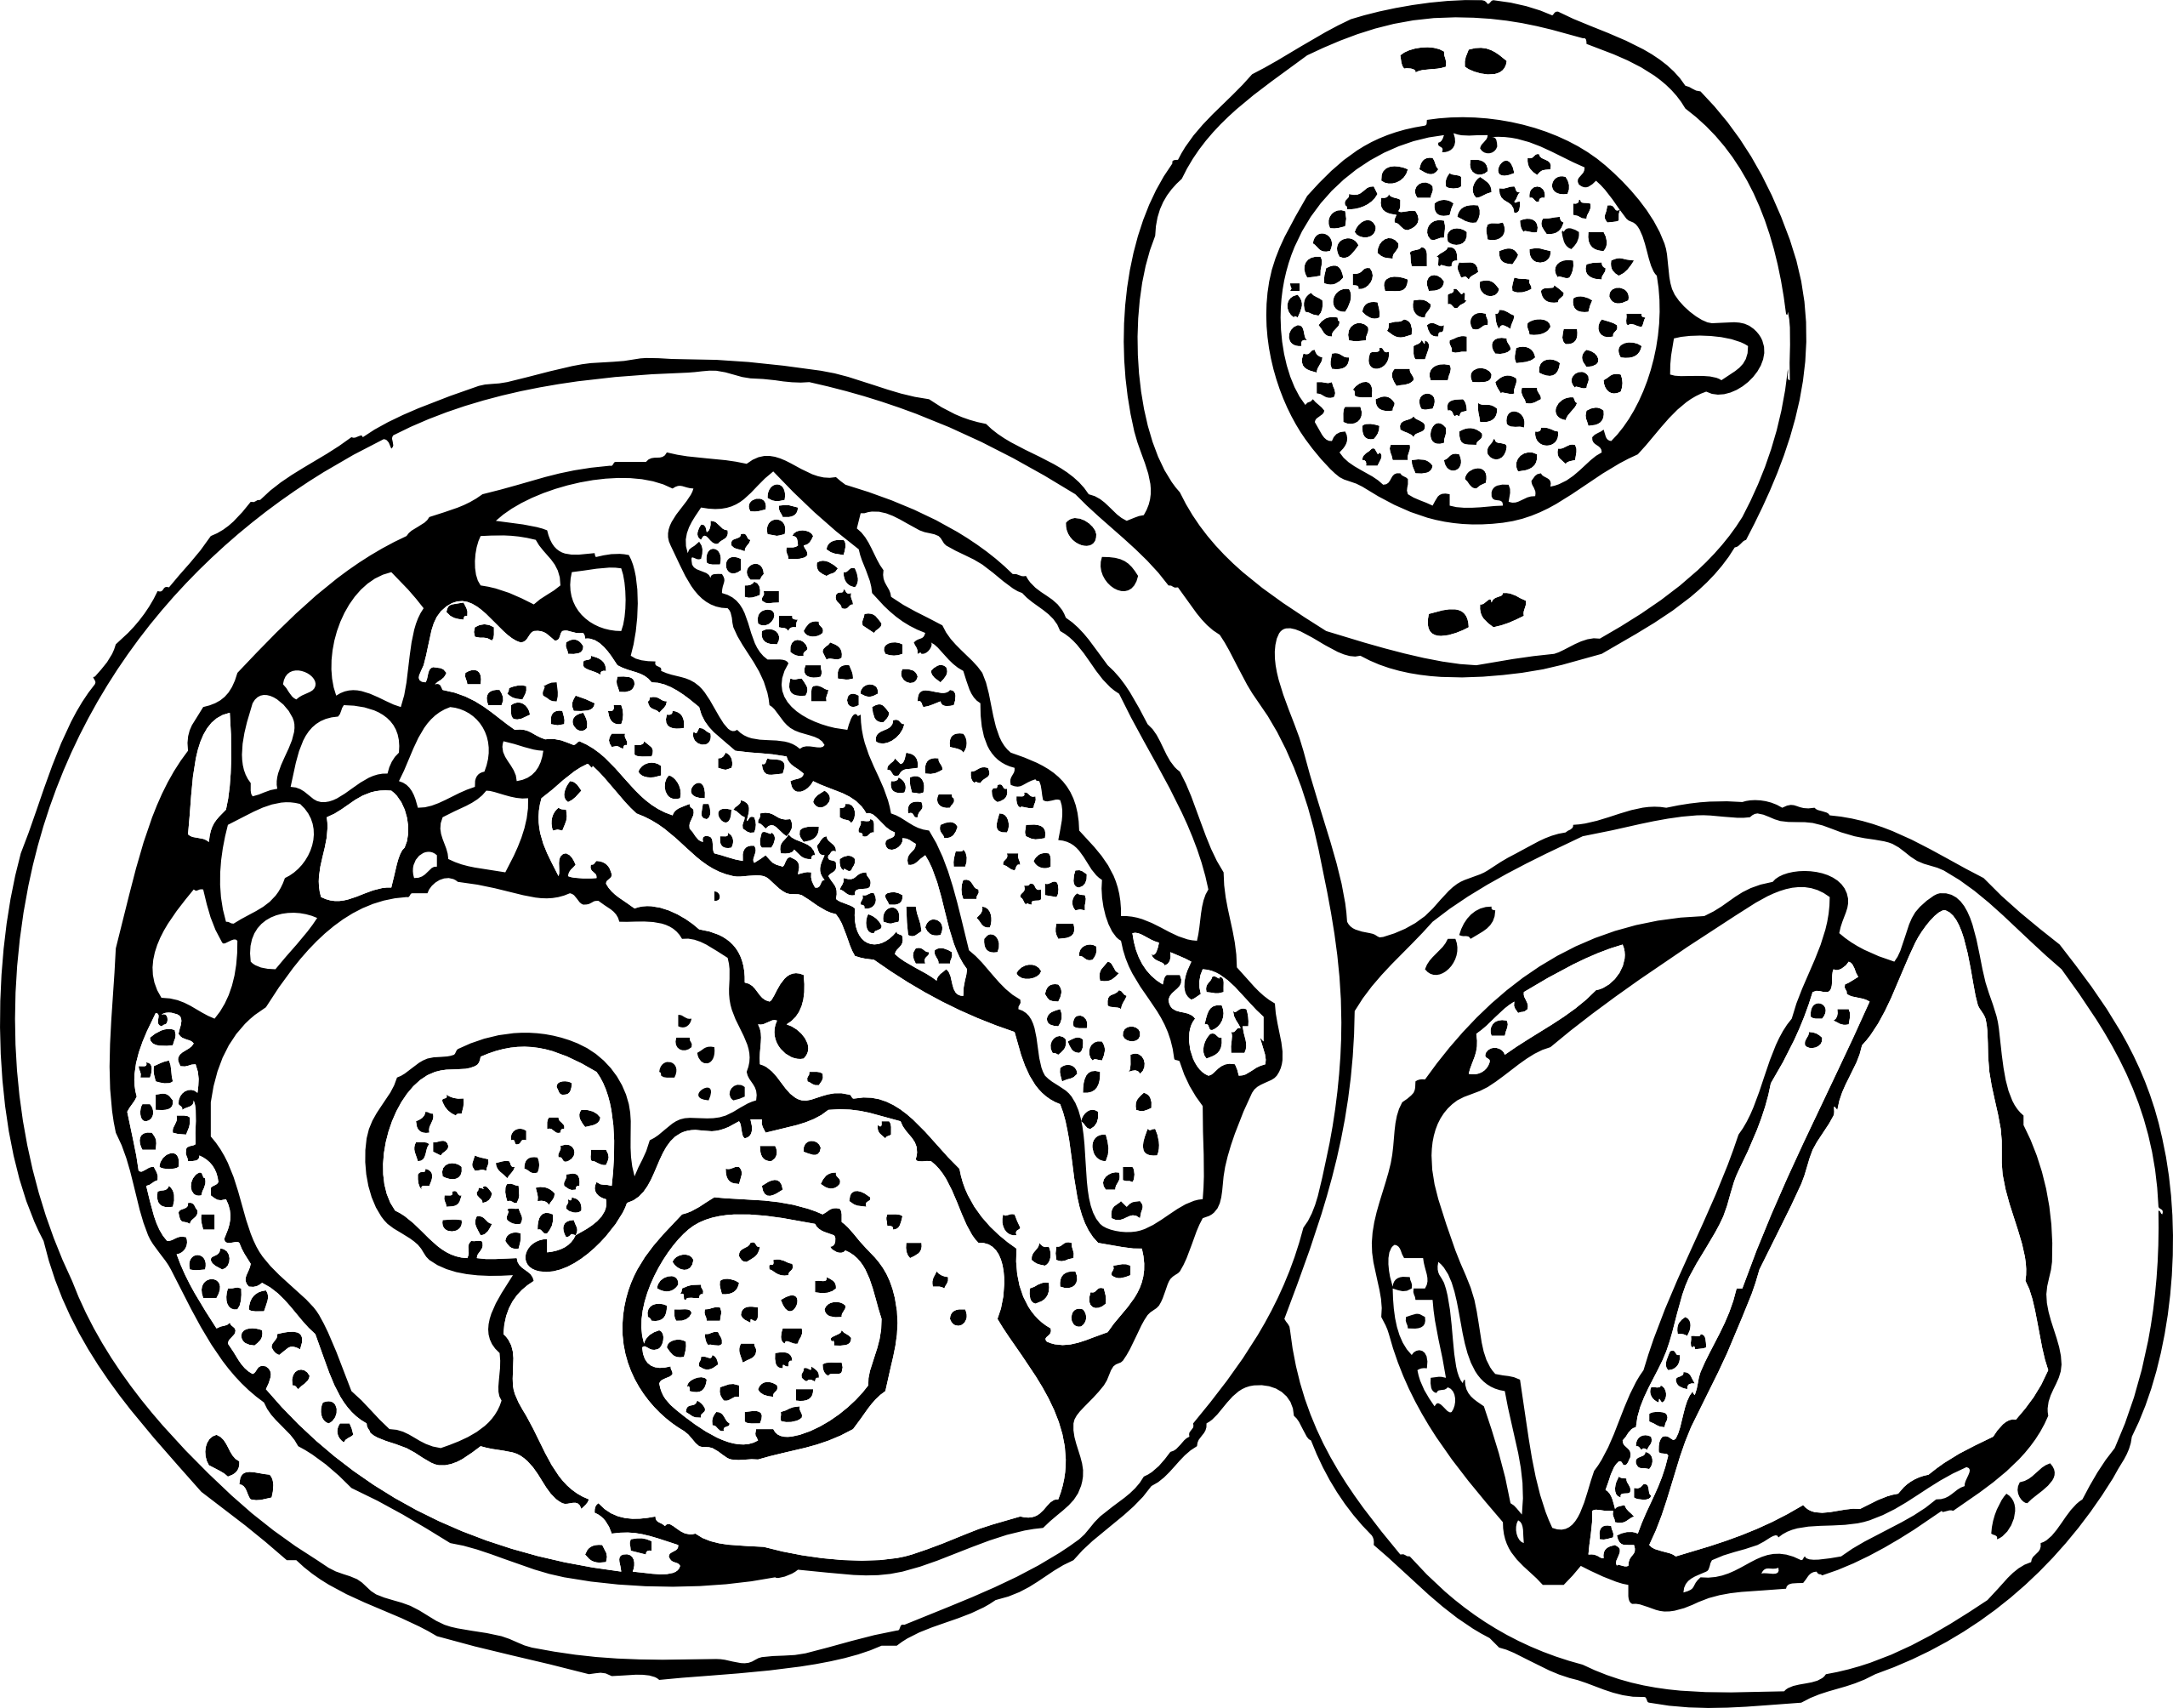 Protein Clipart Black And White   Clipart Panda   Free Clipart Images